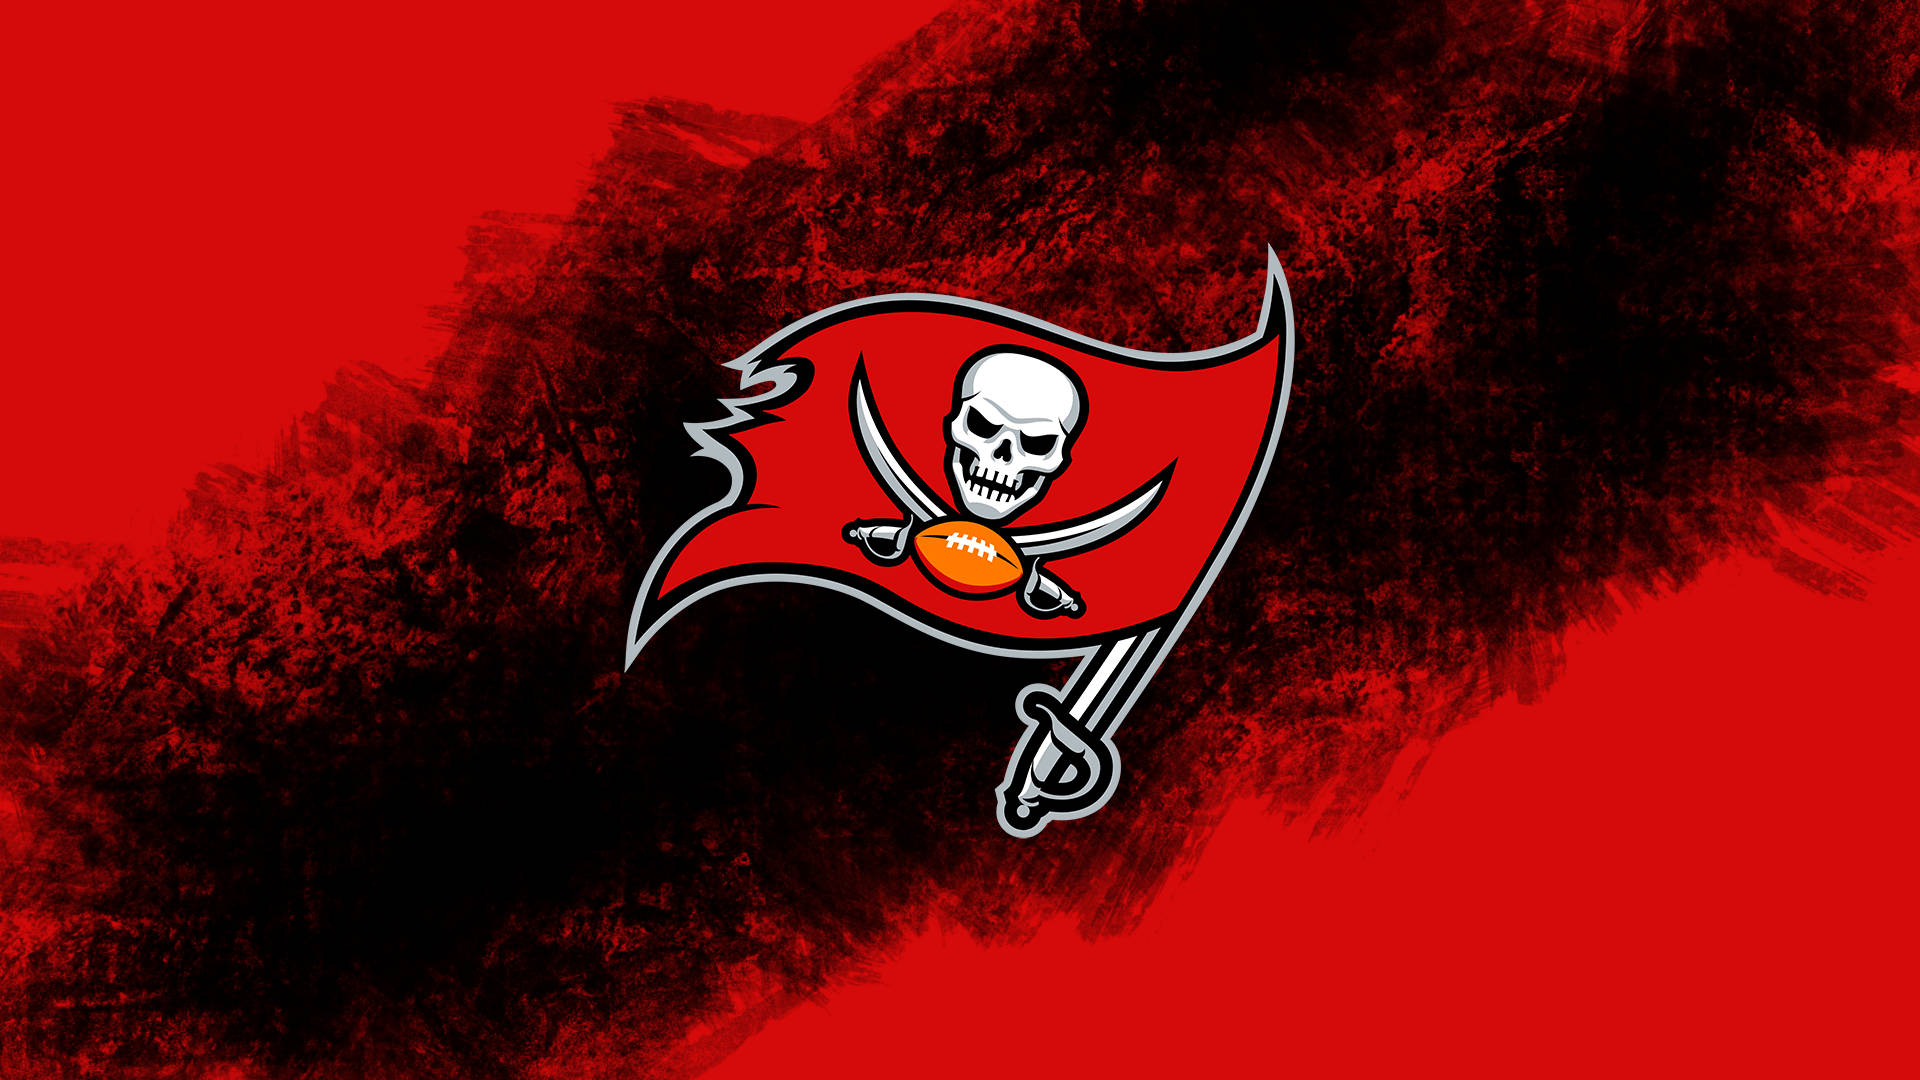 NFL Red Pirate Flag Wallpaper